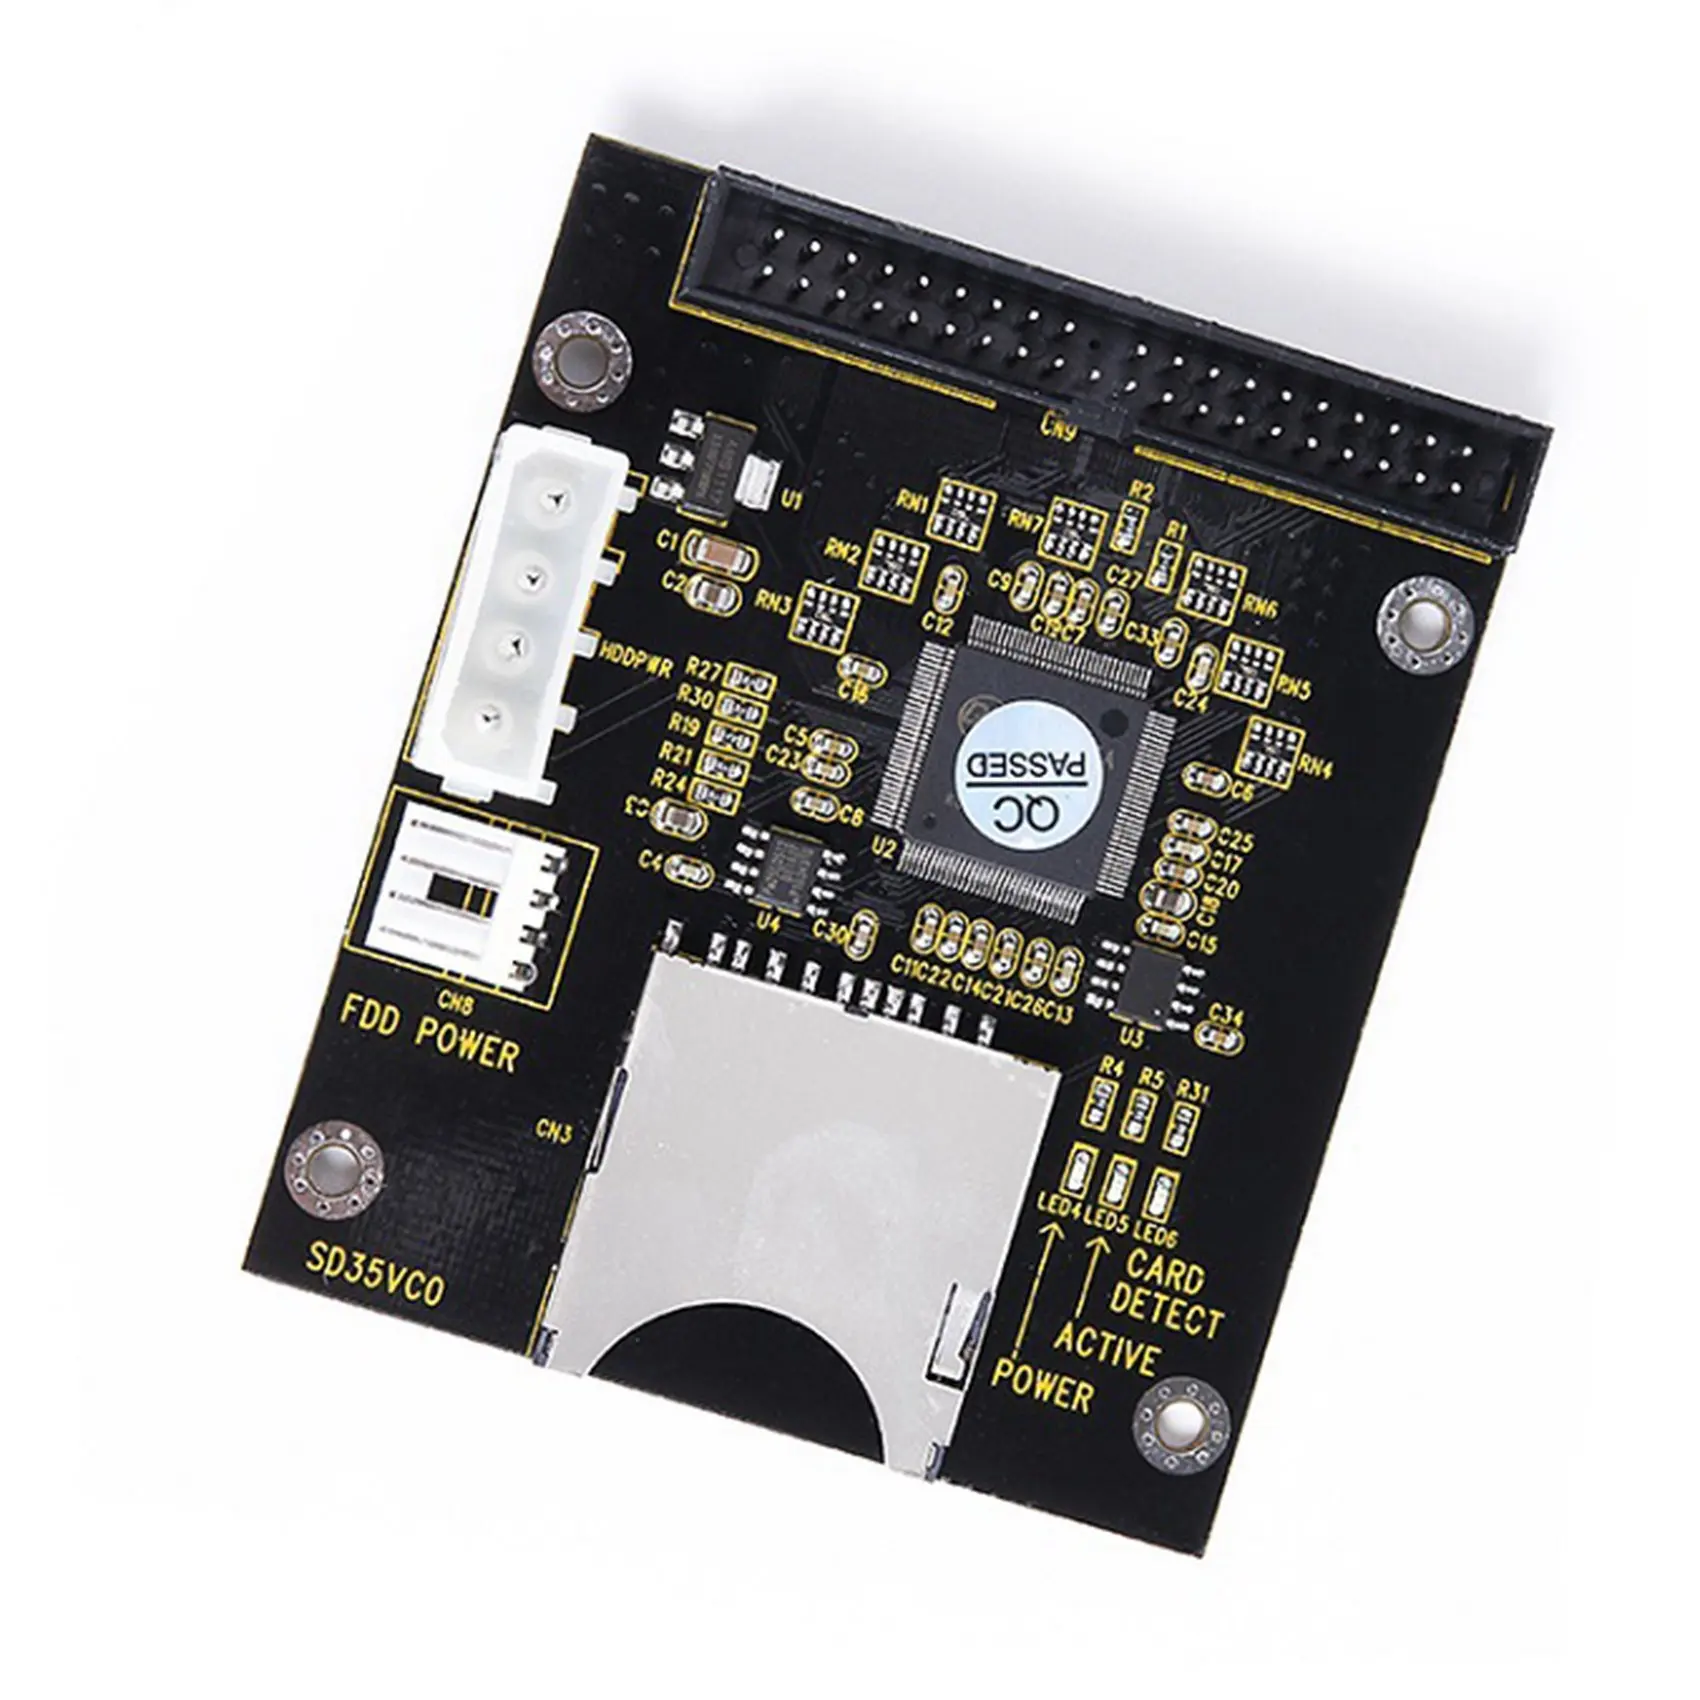 Карта конвертера SD на 3,5 дюйма IDE 40 Pin IDE SD Card Adapter SSD Embedded Storage Adapter Card IDE Expansion Card 3